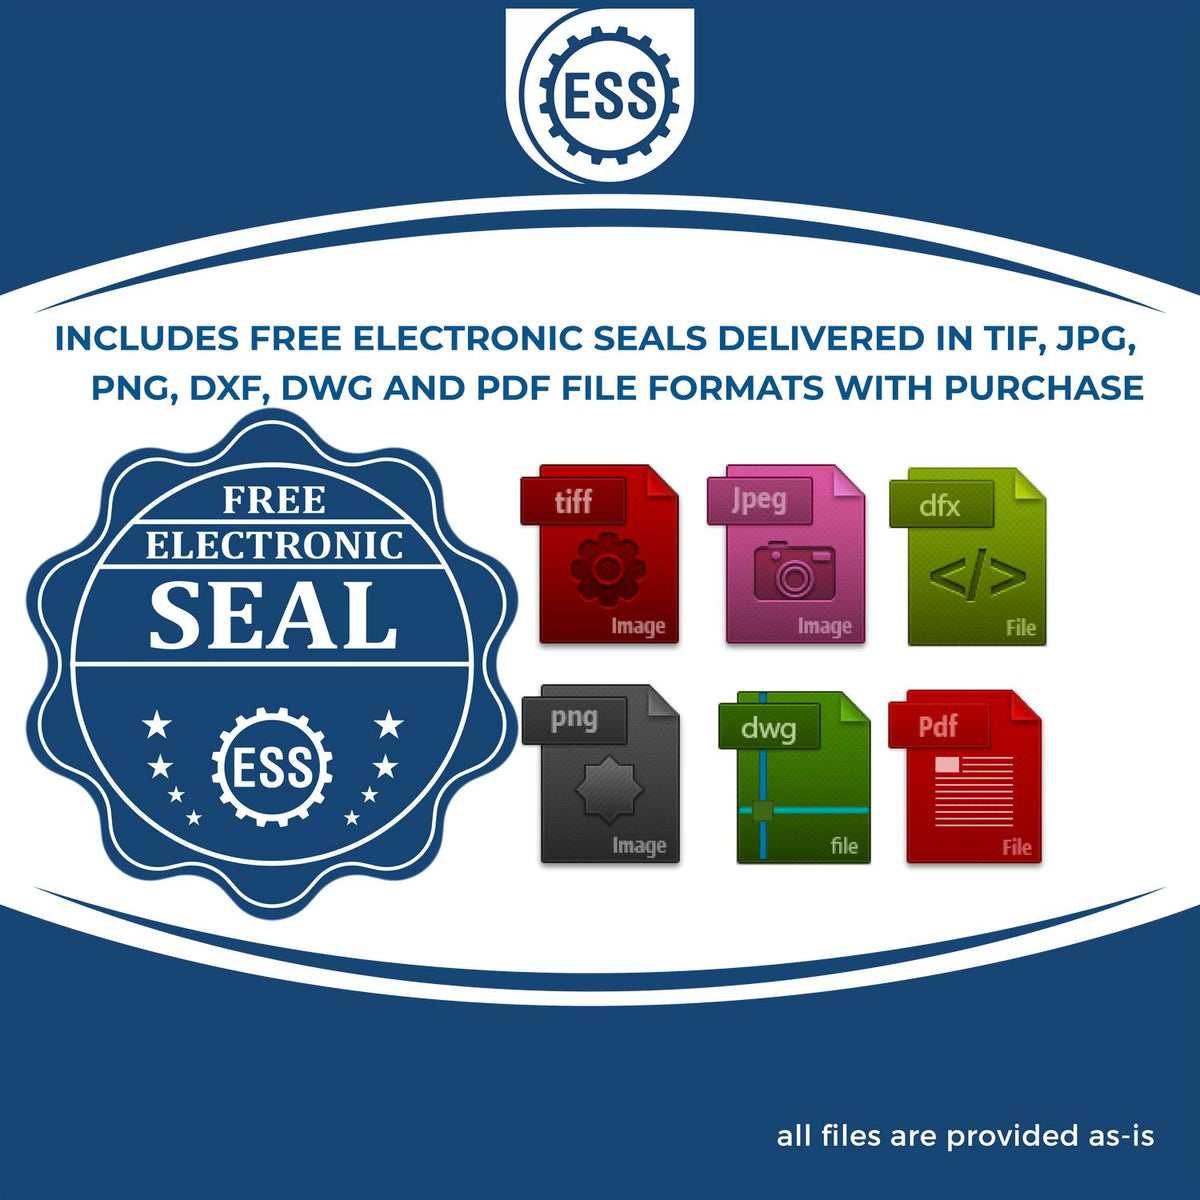 An infographic for the free electronic seal for the Premium MaxLight Pre-Inked Indiana Geology Stamp illustrating the different file type icons such as DXF, DWG, TIF, JPG and PNG.